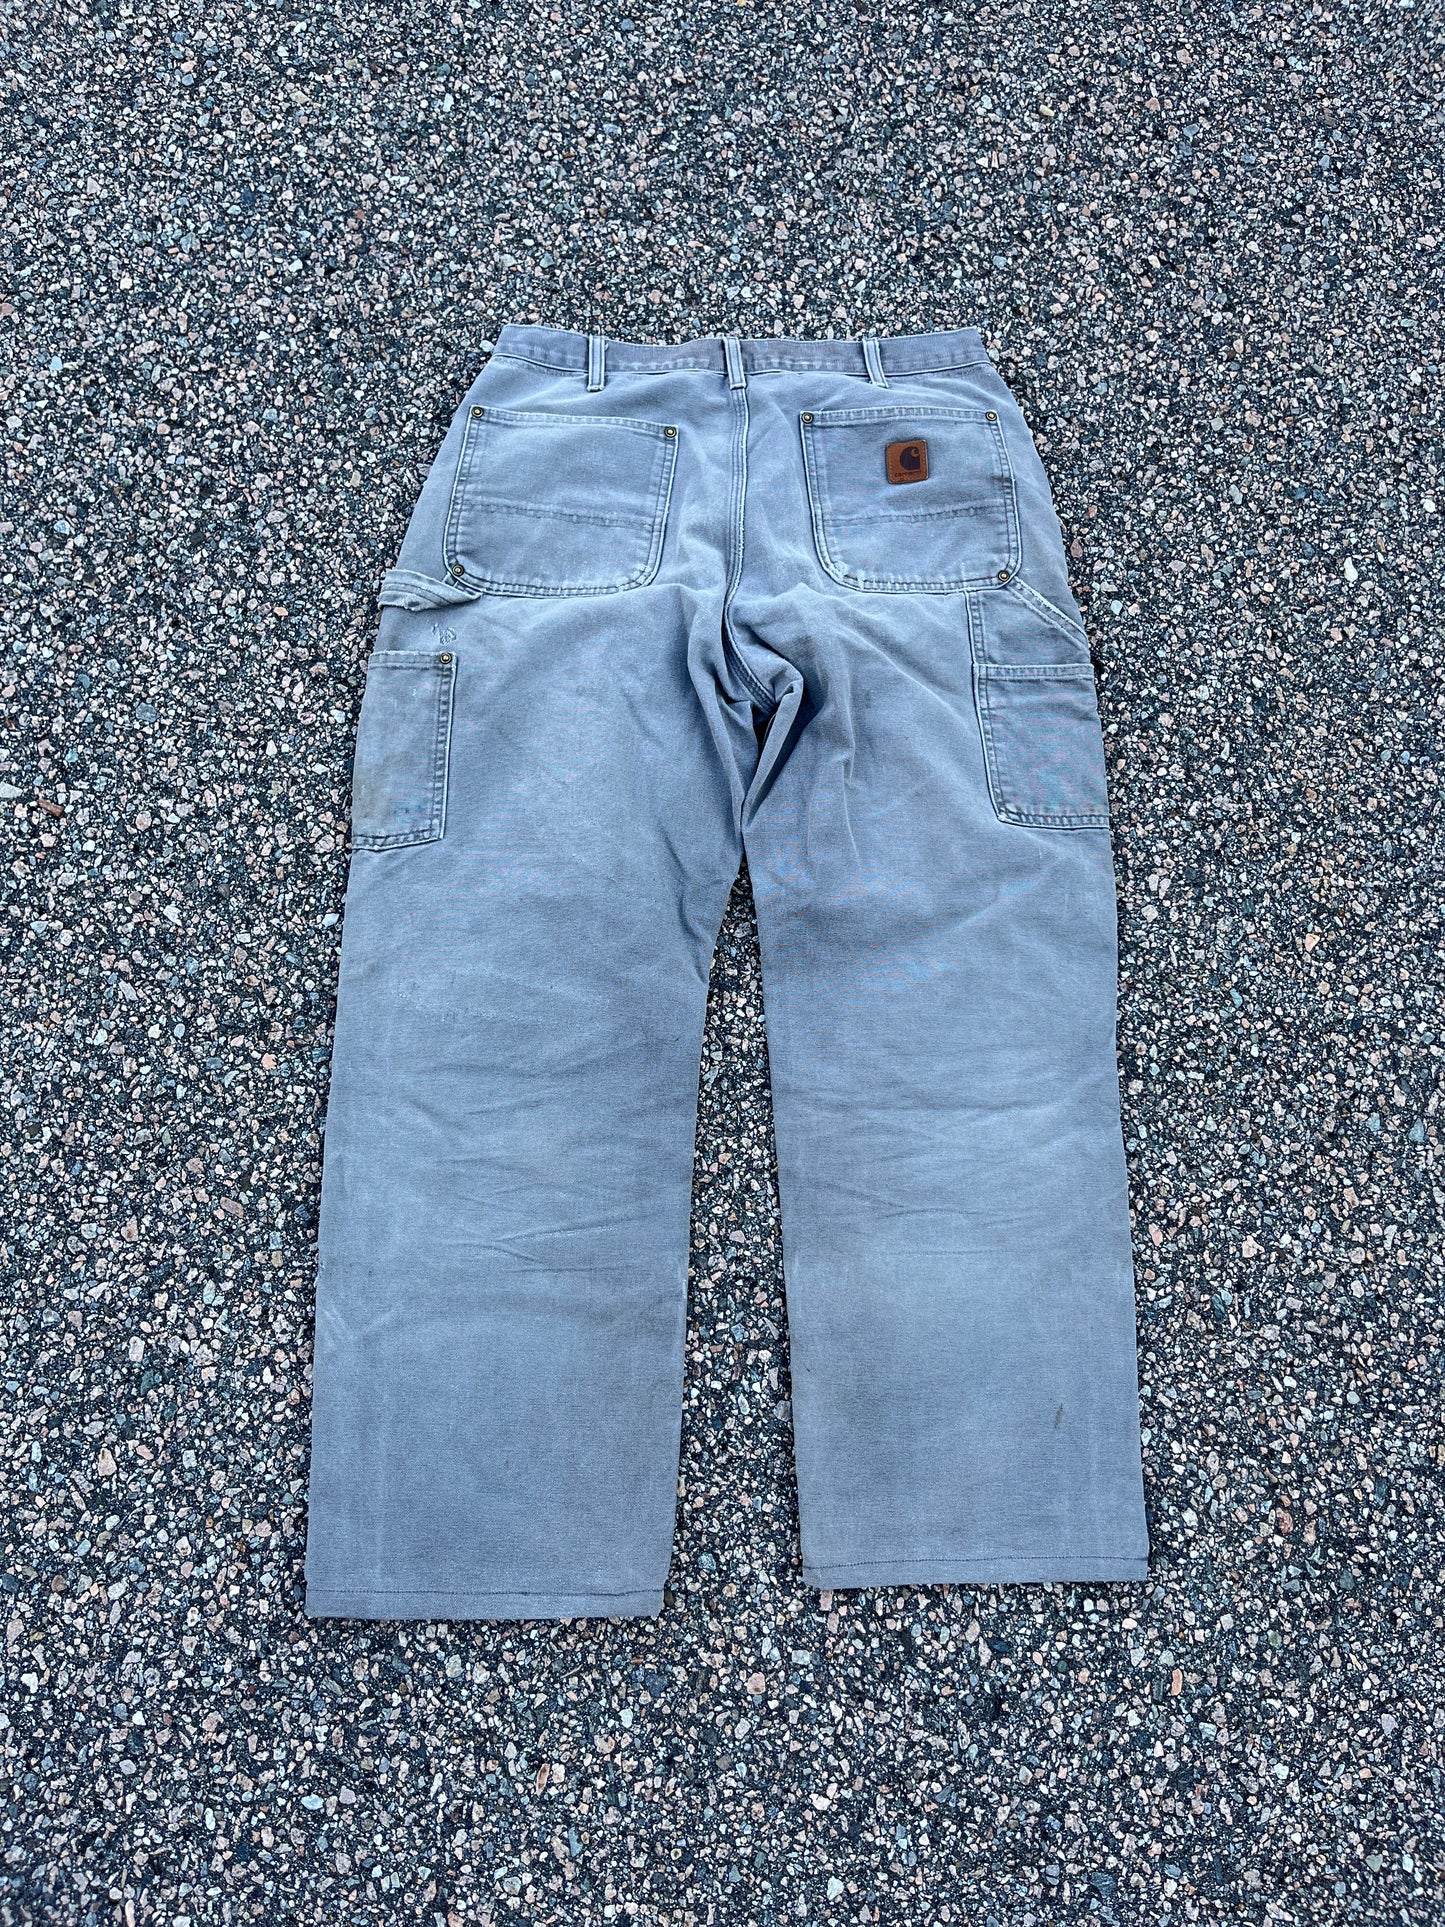 Faded Cement Grey Carhartt Double Knee Pants - 32 x 28